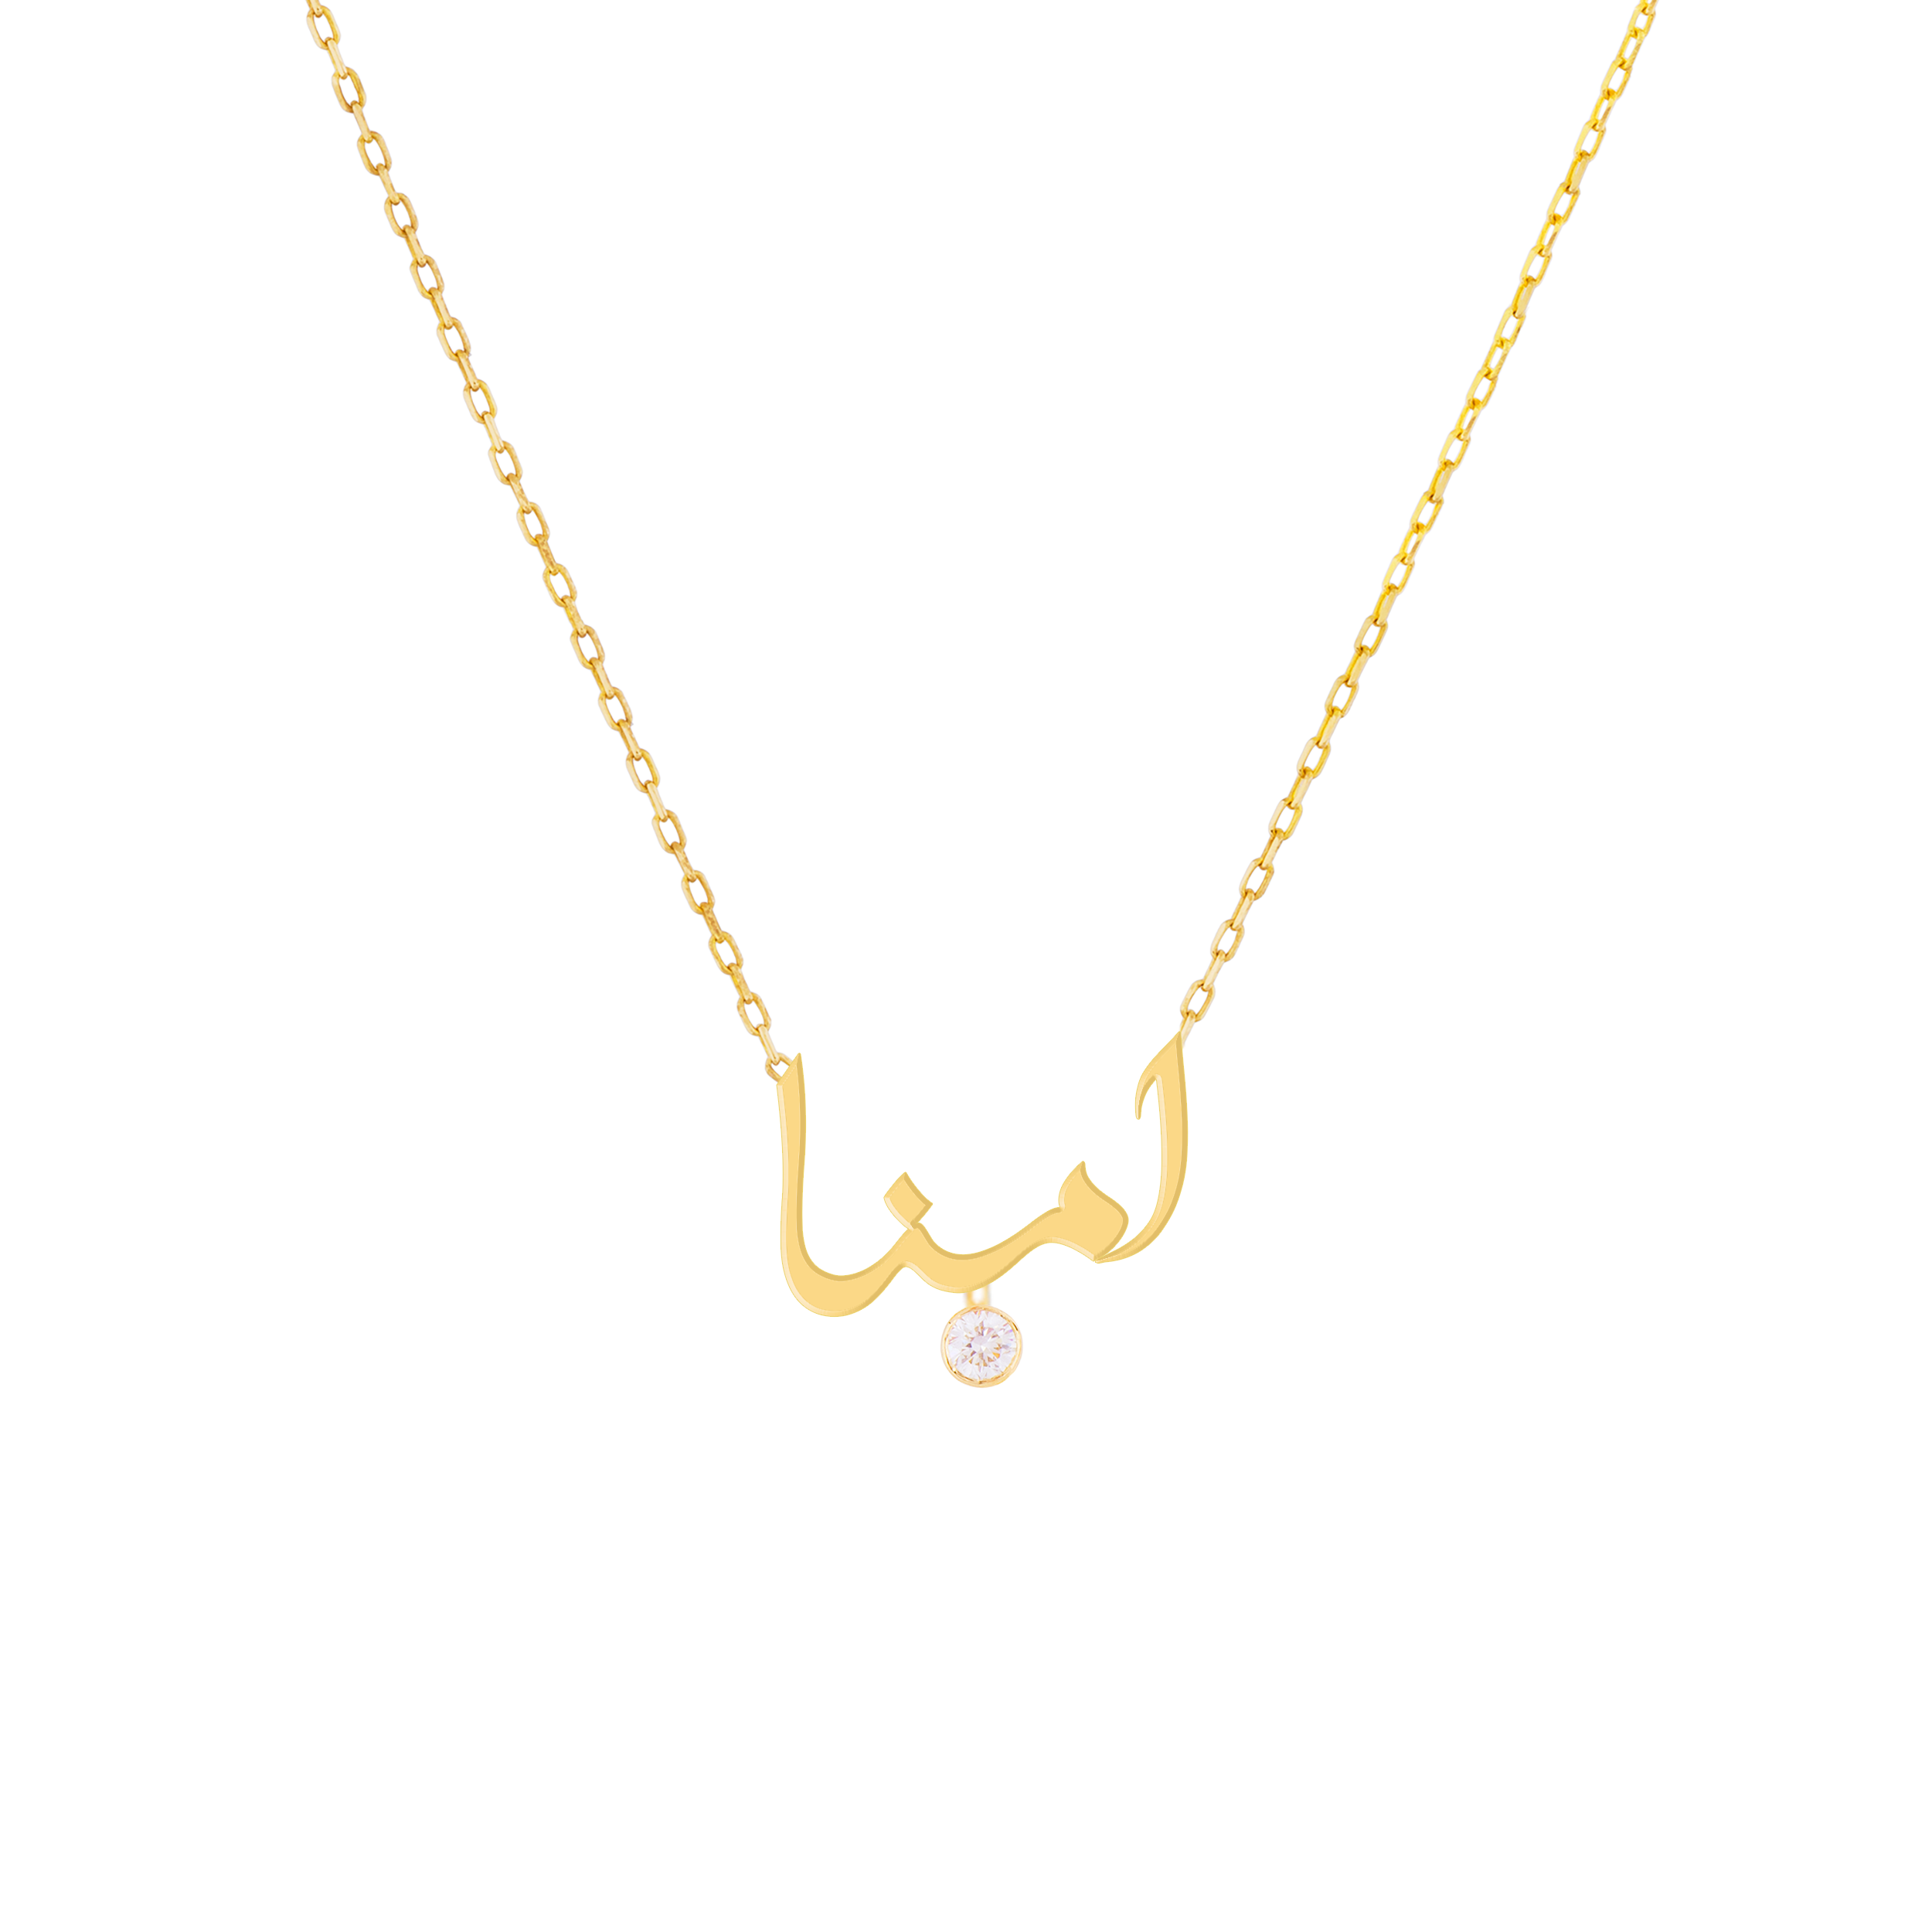 Arabic name necklace with diamonds